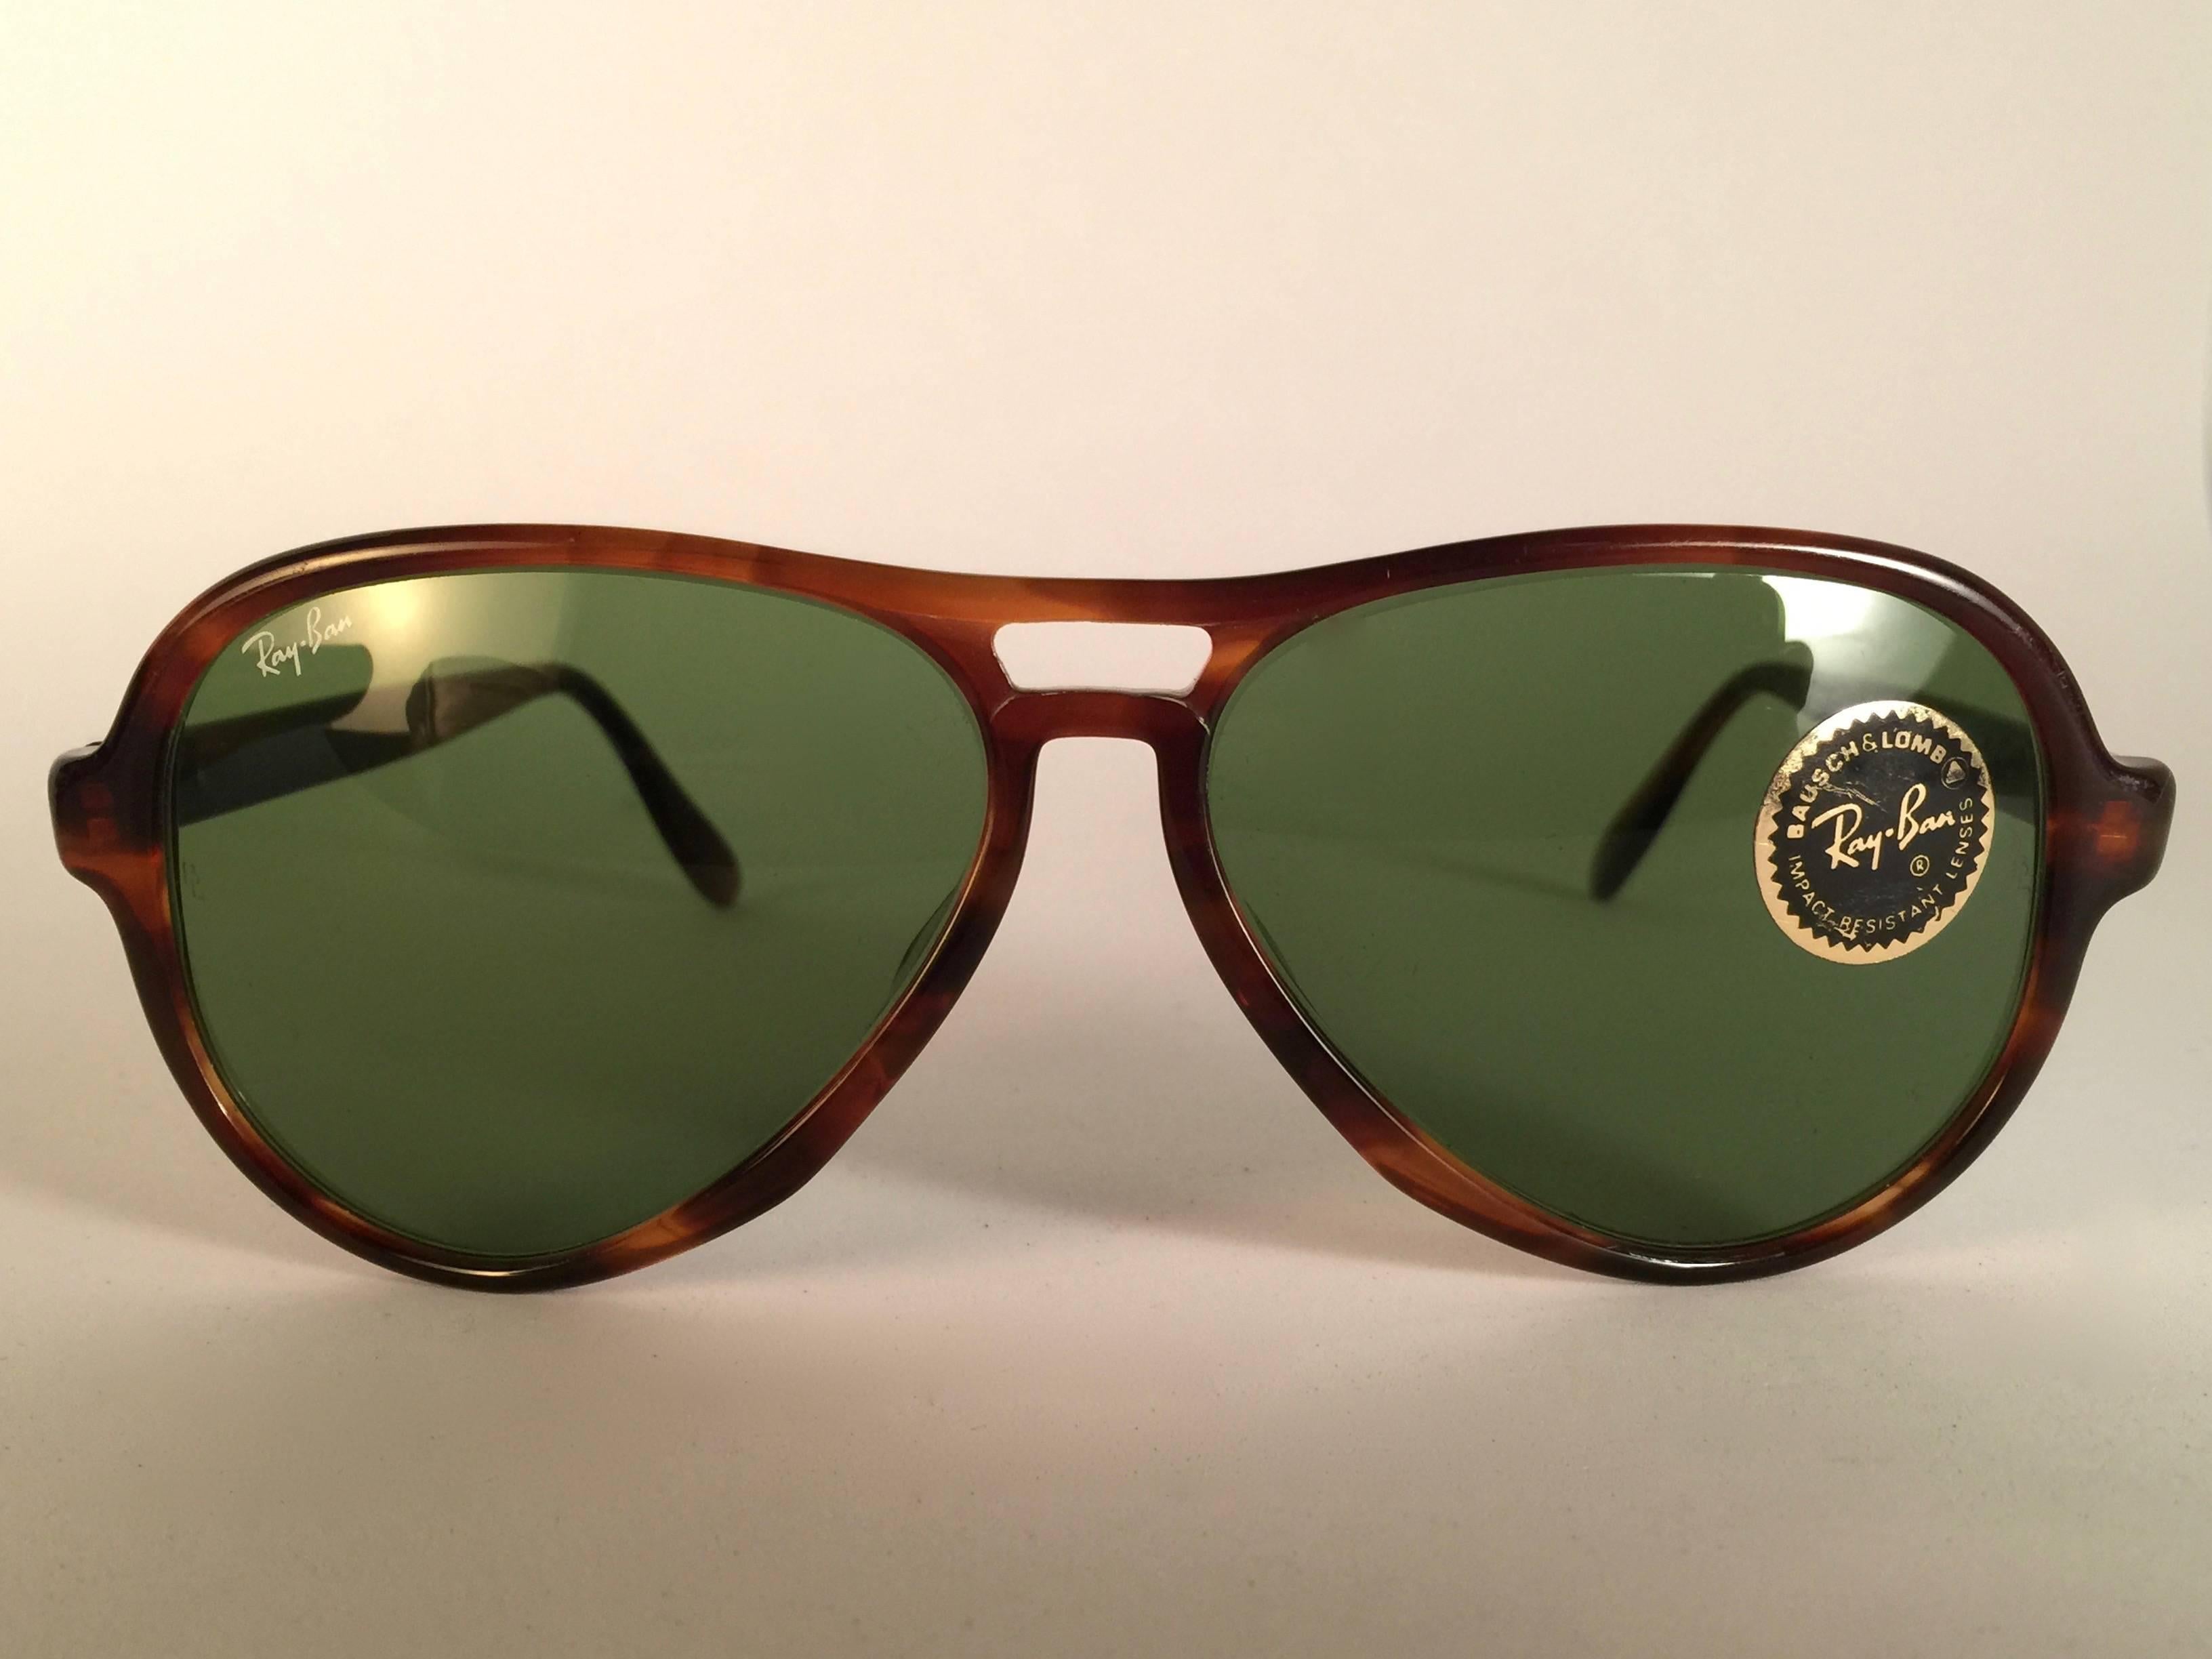 New and rare vintage Vagabond tortoise frame holding a spotless pair of G15 grey lenses.  
New, never worn or displayed.  This pair may have minor sign of wear due to nearly 40 years of storage. Designed and Produced in USA.
